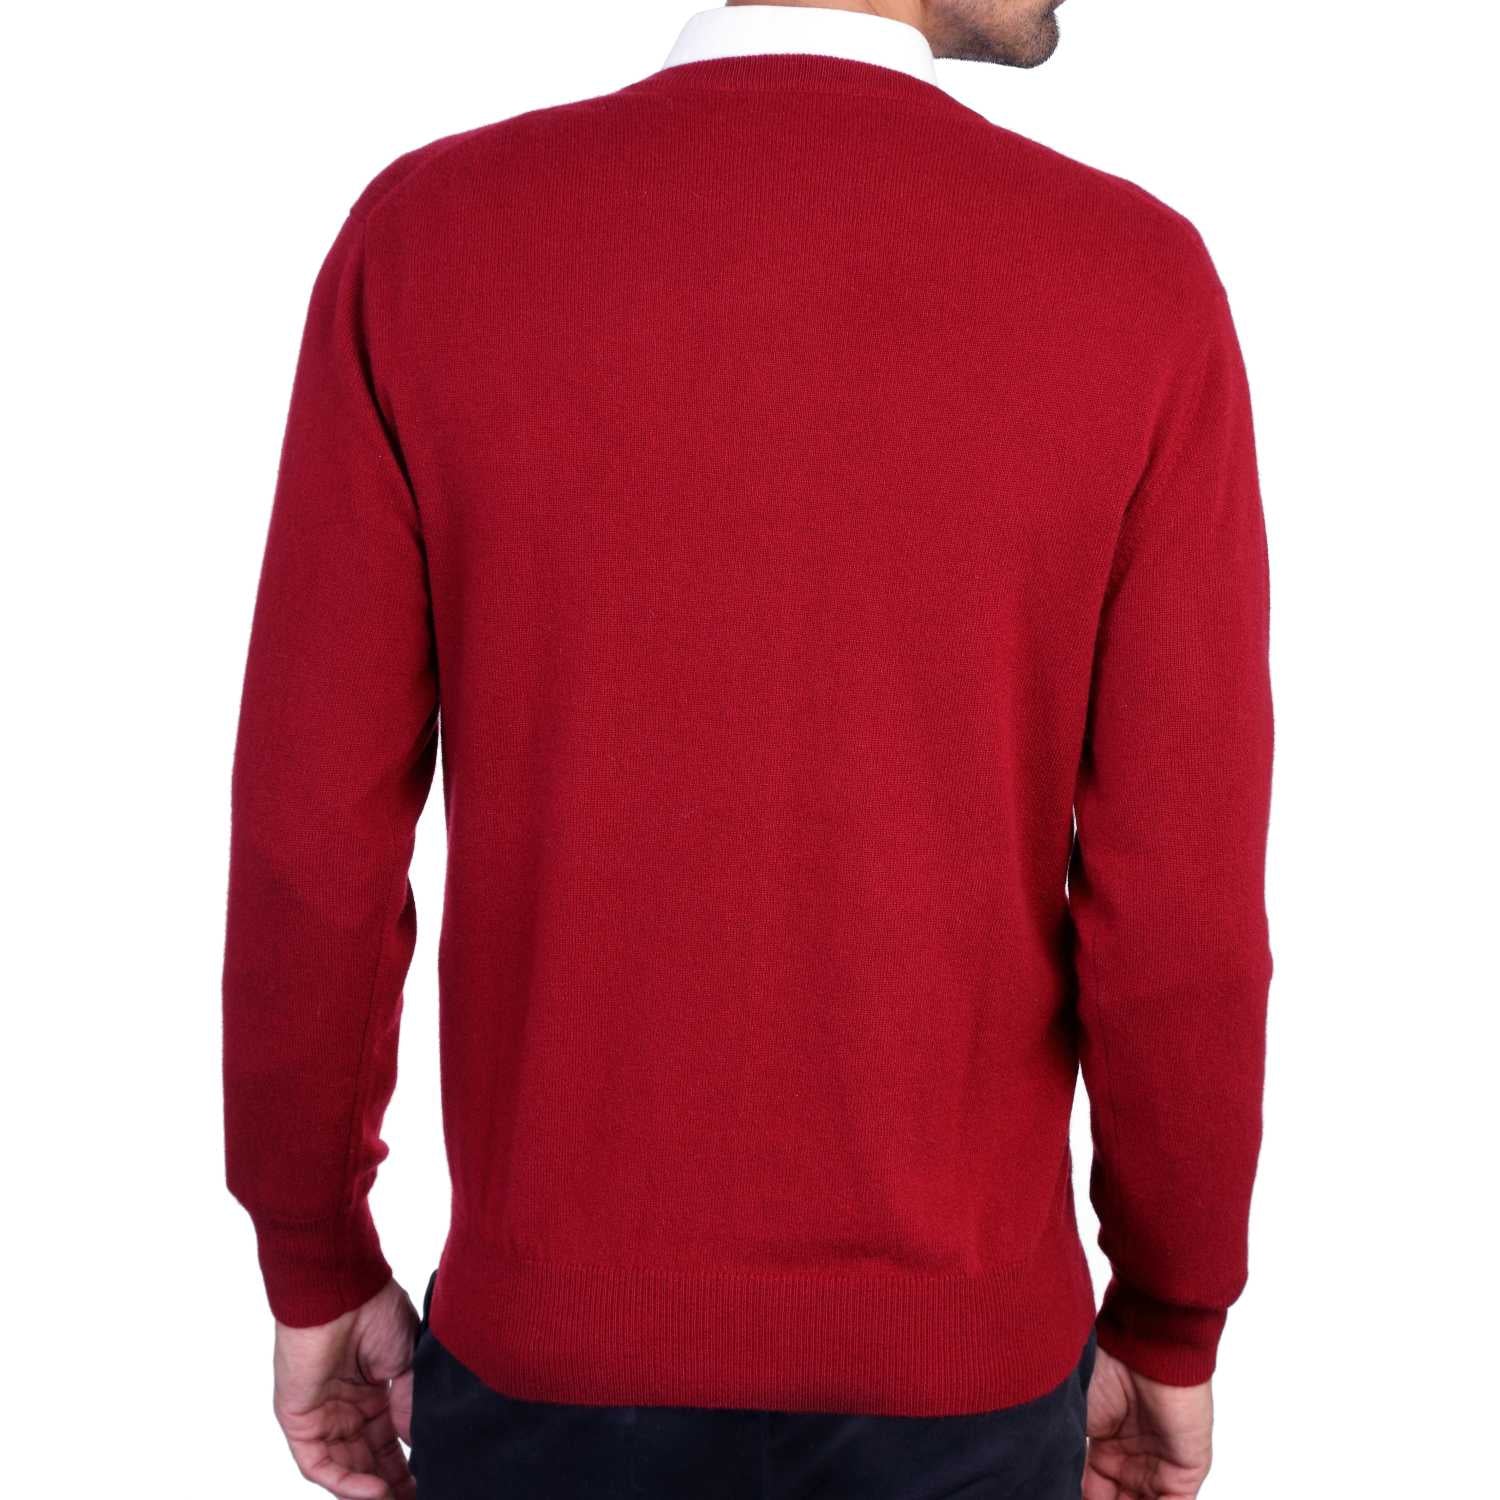 Mens Burgundy Wine Cashmere Round Neck Sweater | Back | Shop at The Cashmere Choice | London